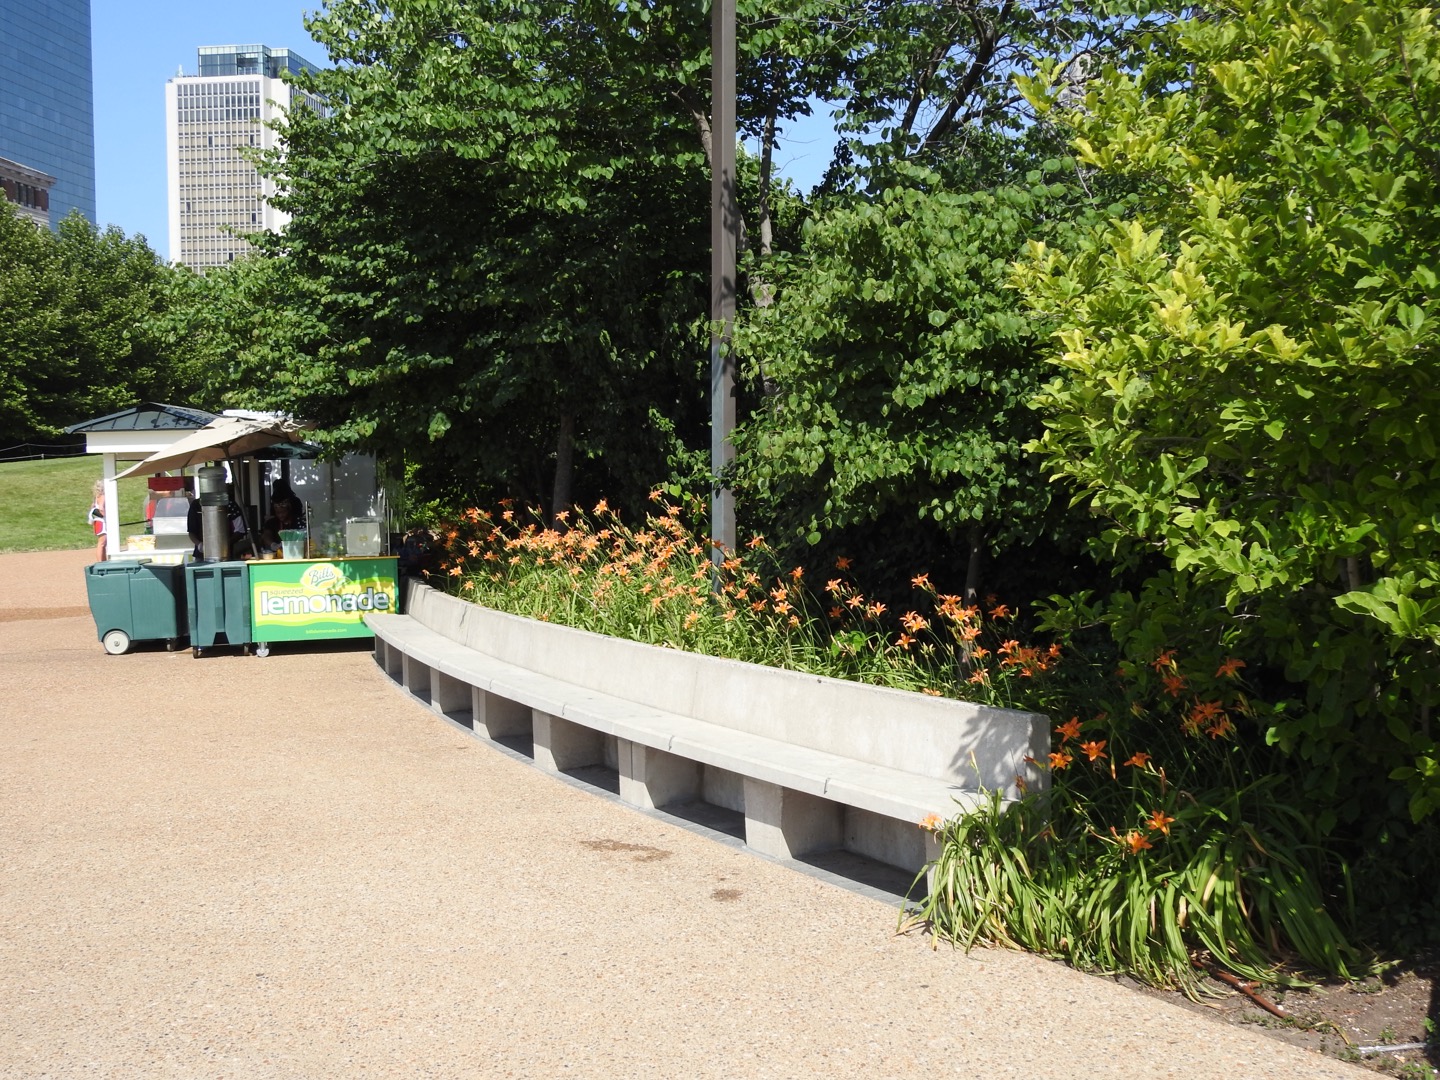 A row of orange flowers sticks out over a concrete bench. A lemonade stand is in the left-center of the photo.